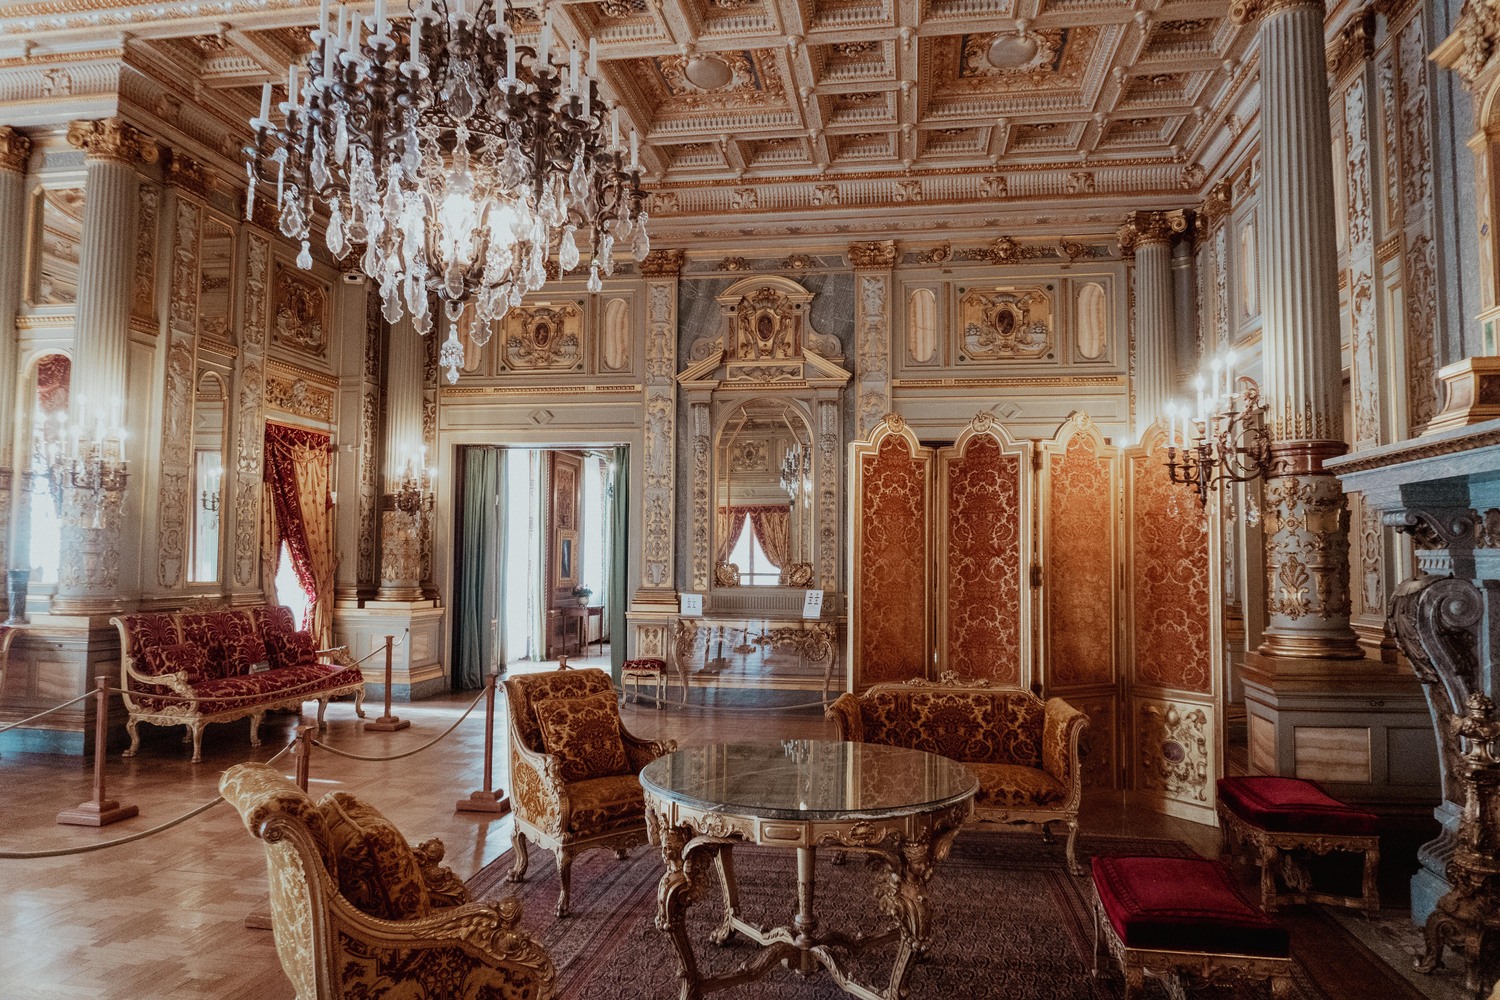 In the historic Breakers Mansion, a chandelier and grand parlor symbolize the wealth of the Guilded Age.